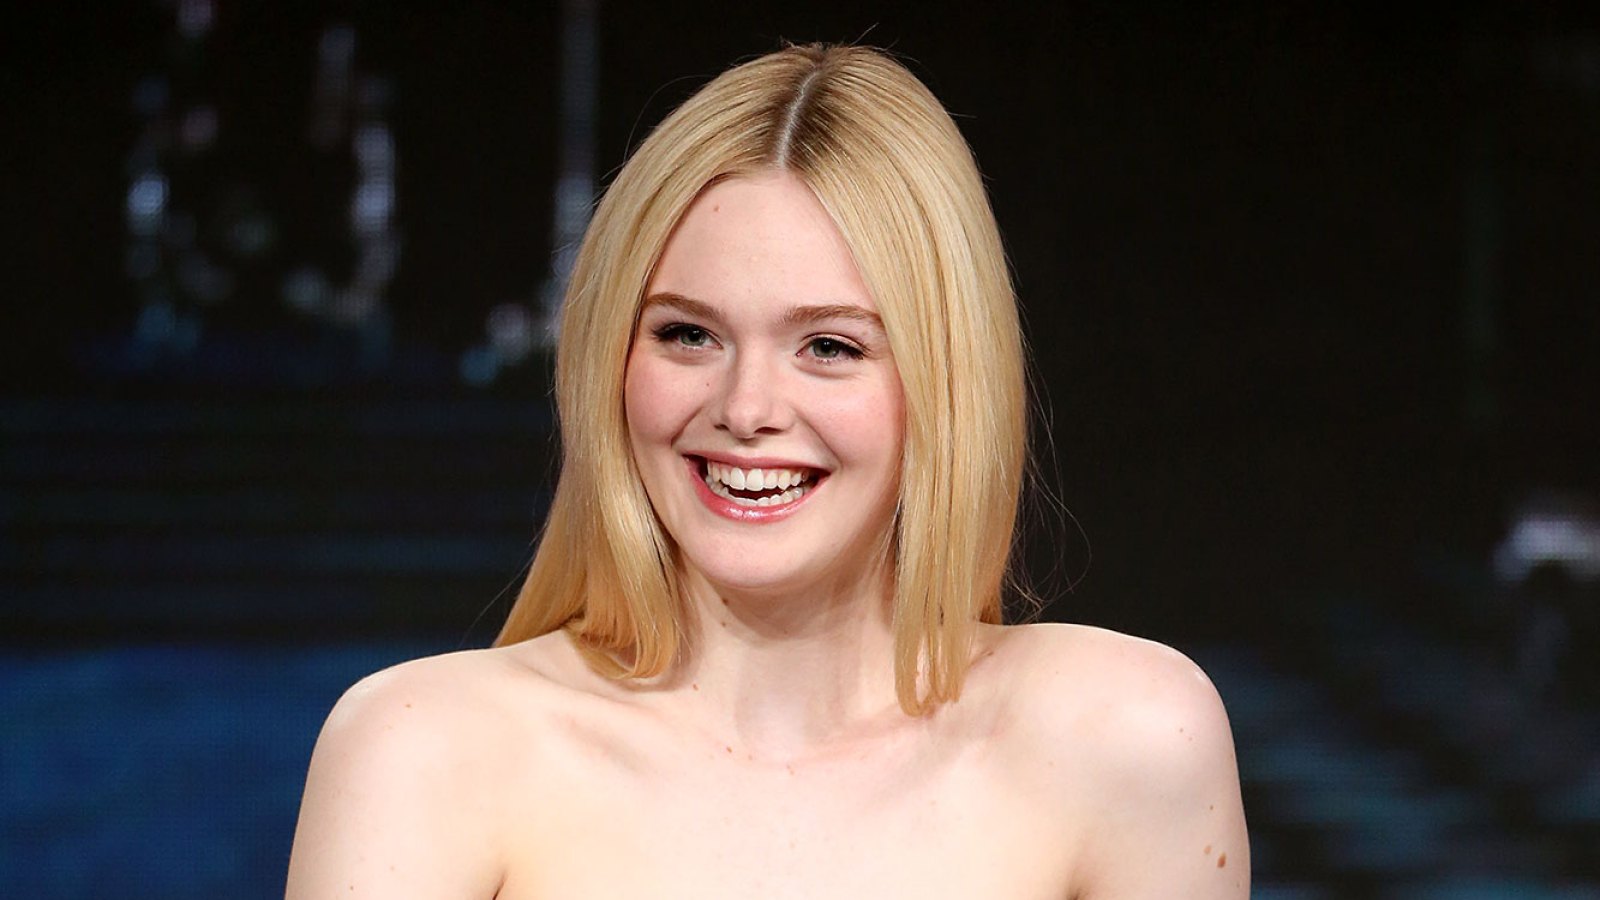 Elle Fanning The Great Hulu Admits She Threw Up a Lot in the Uber'on Her 21st Birthday